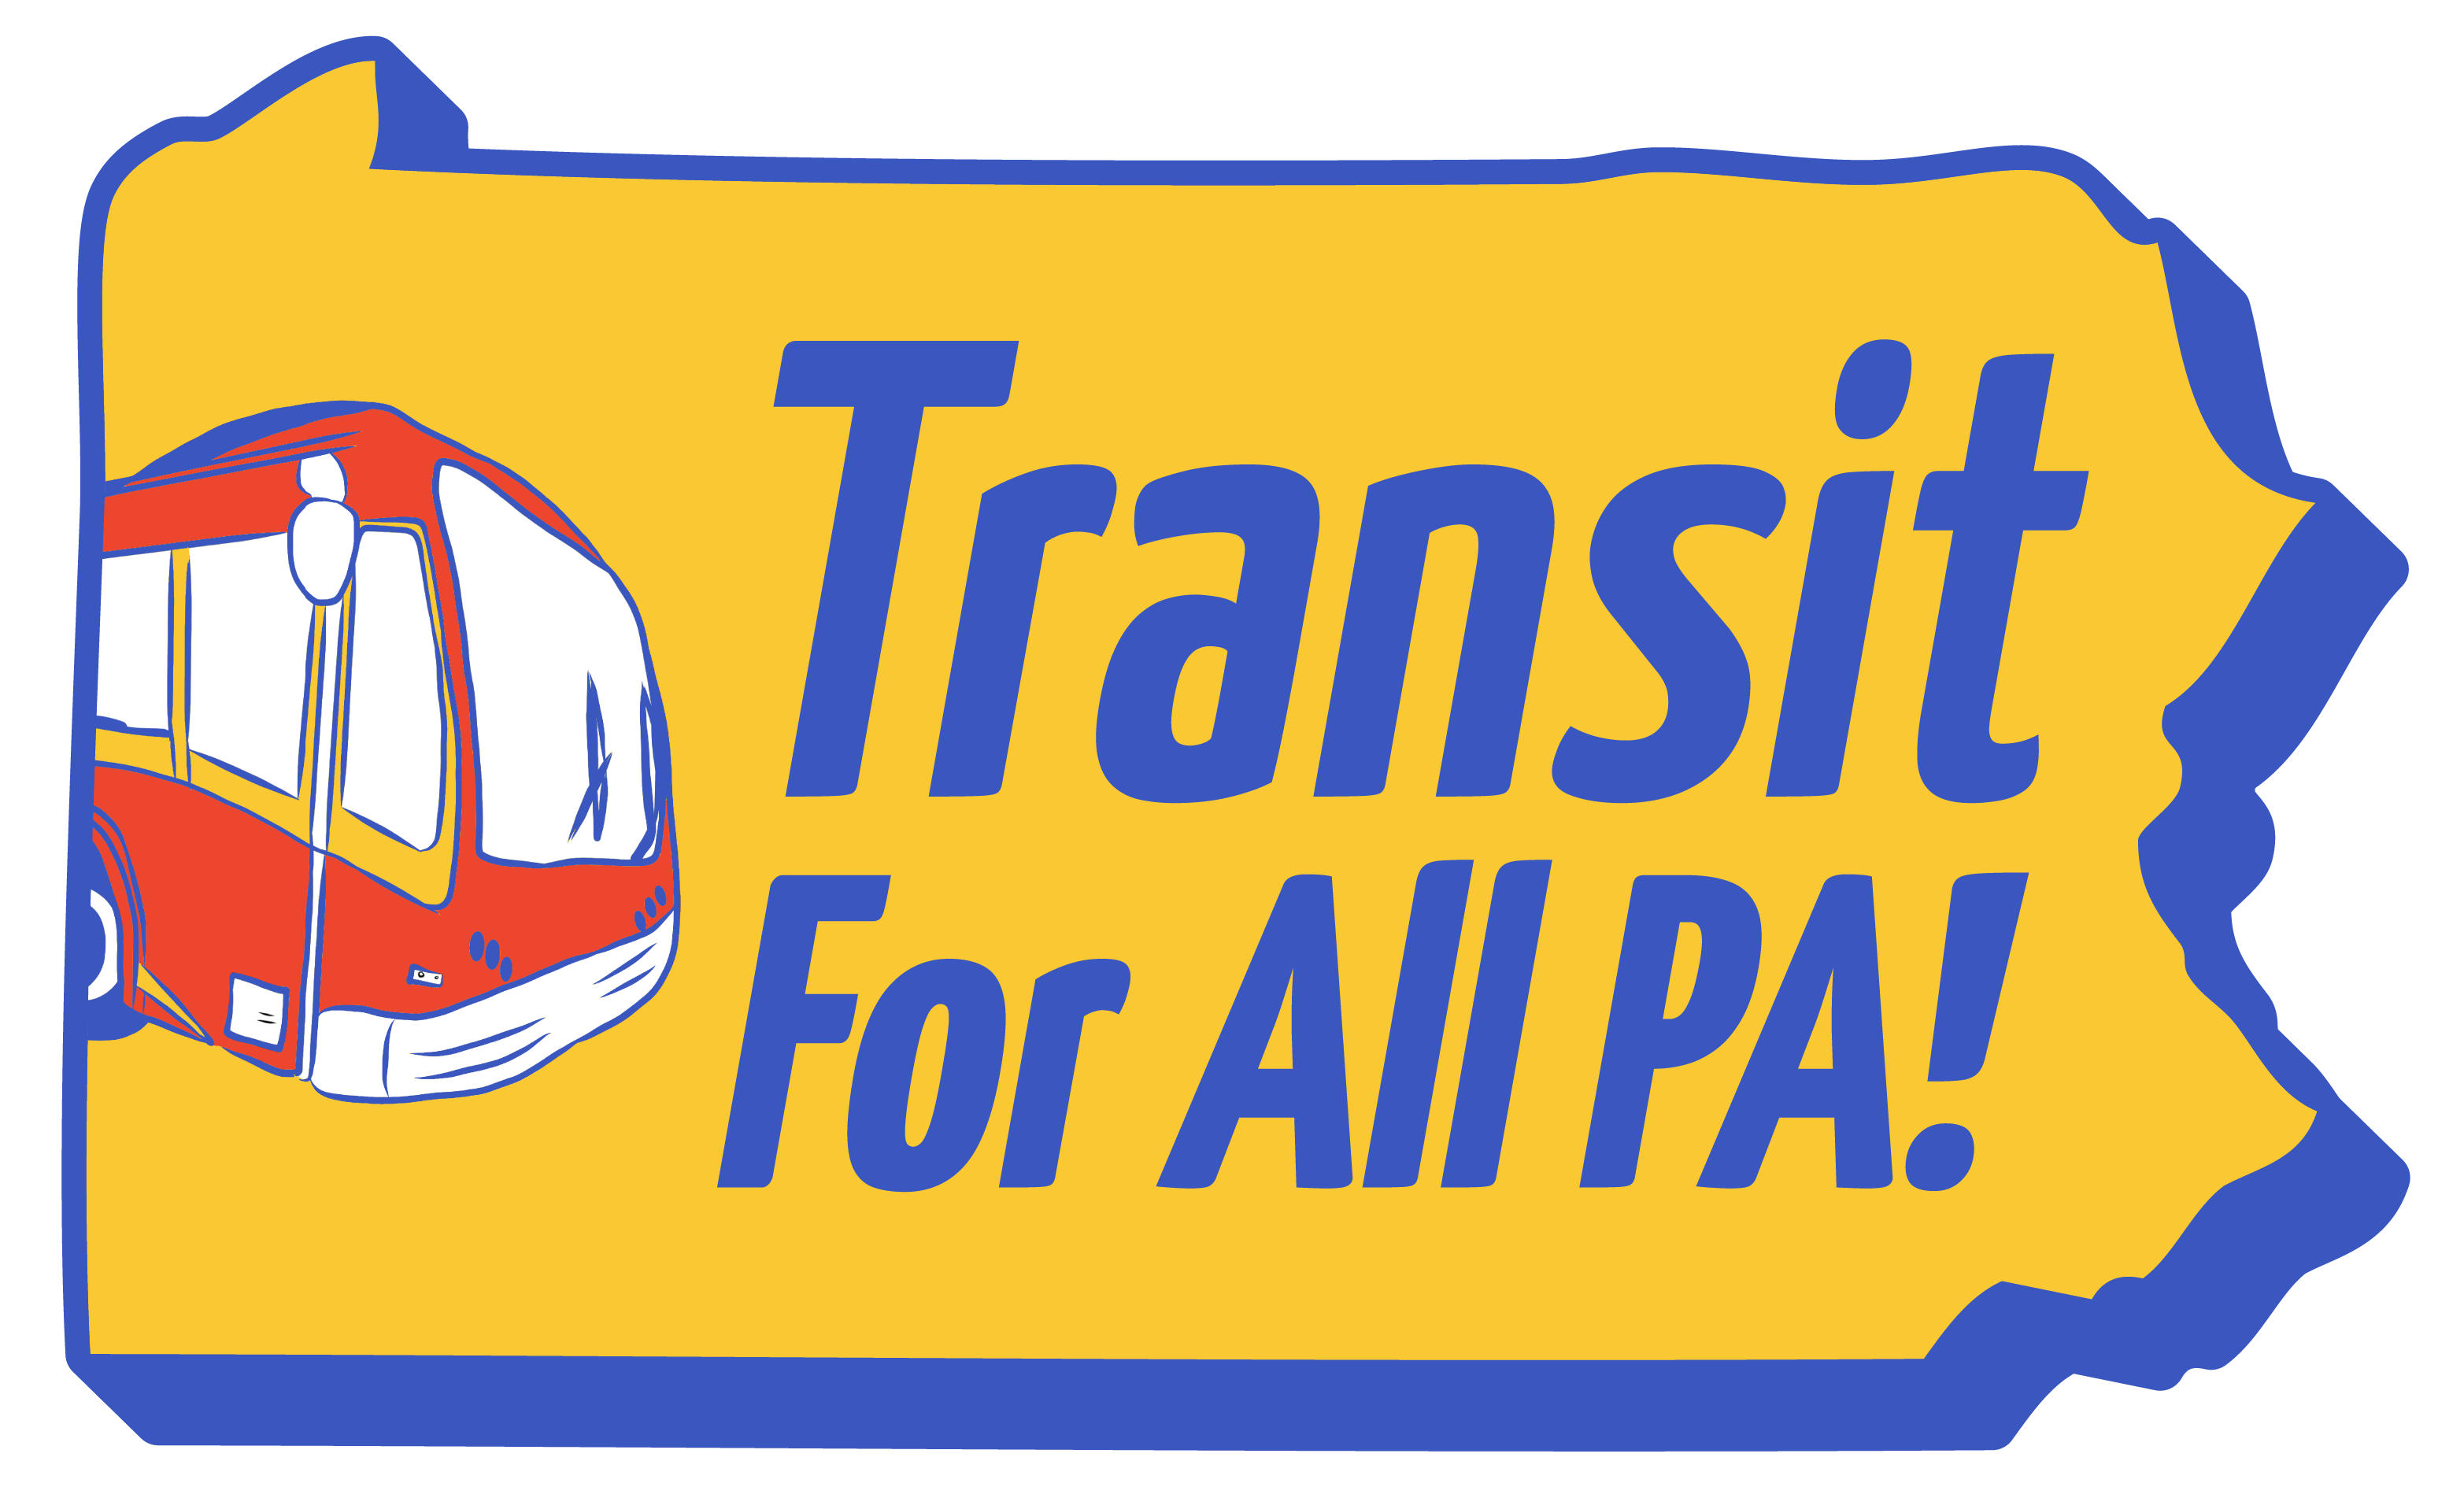 Transit for All PA! – Lets make transit to move all Pennsylvanians